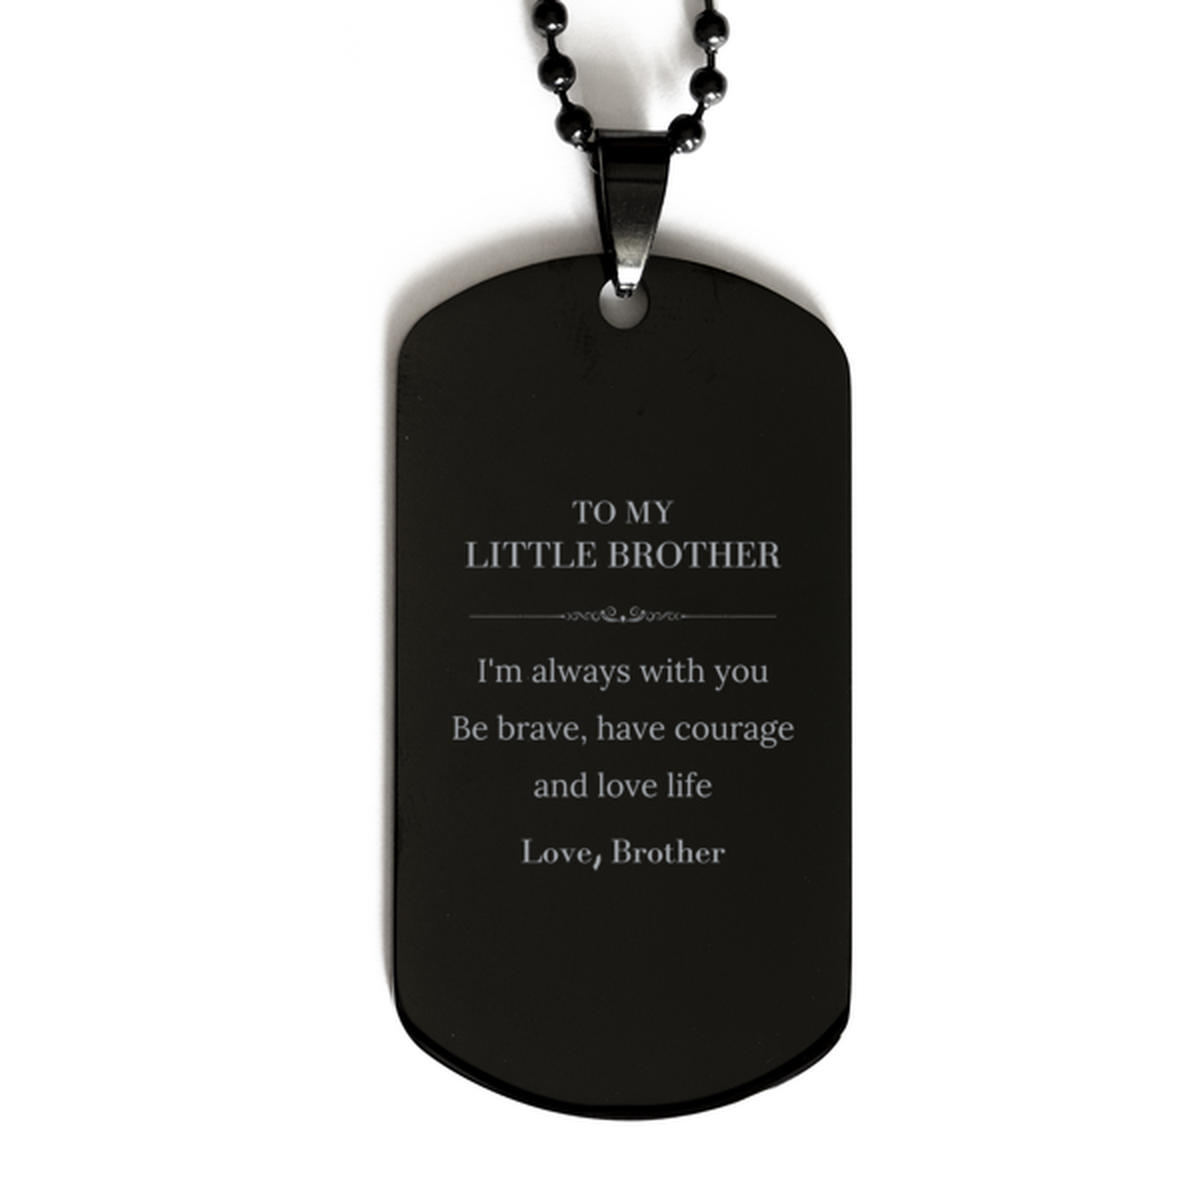 To My Little Brother Gifts from Brother, Unique Black Dog Tag Inspirational Christmas Birthday Graduation Gifts for Little Brother I'm always with you. Be brave, have courage and love life. Love, Brother